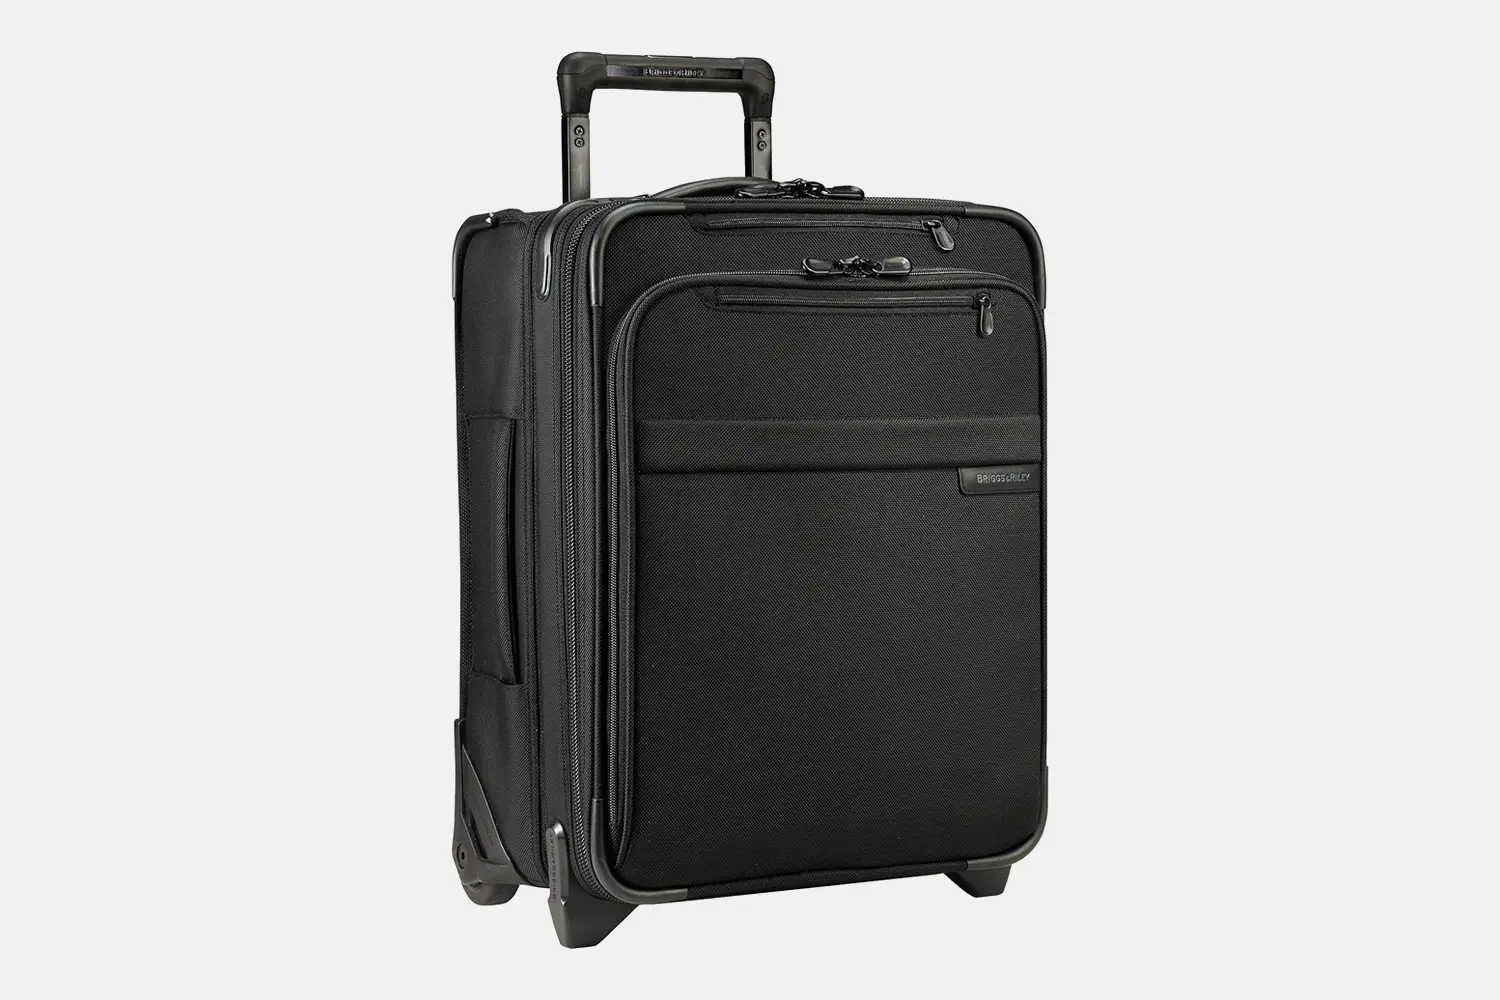 Briggs & Riley Baseline Carry-on Luggage